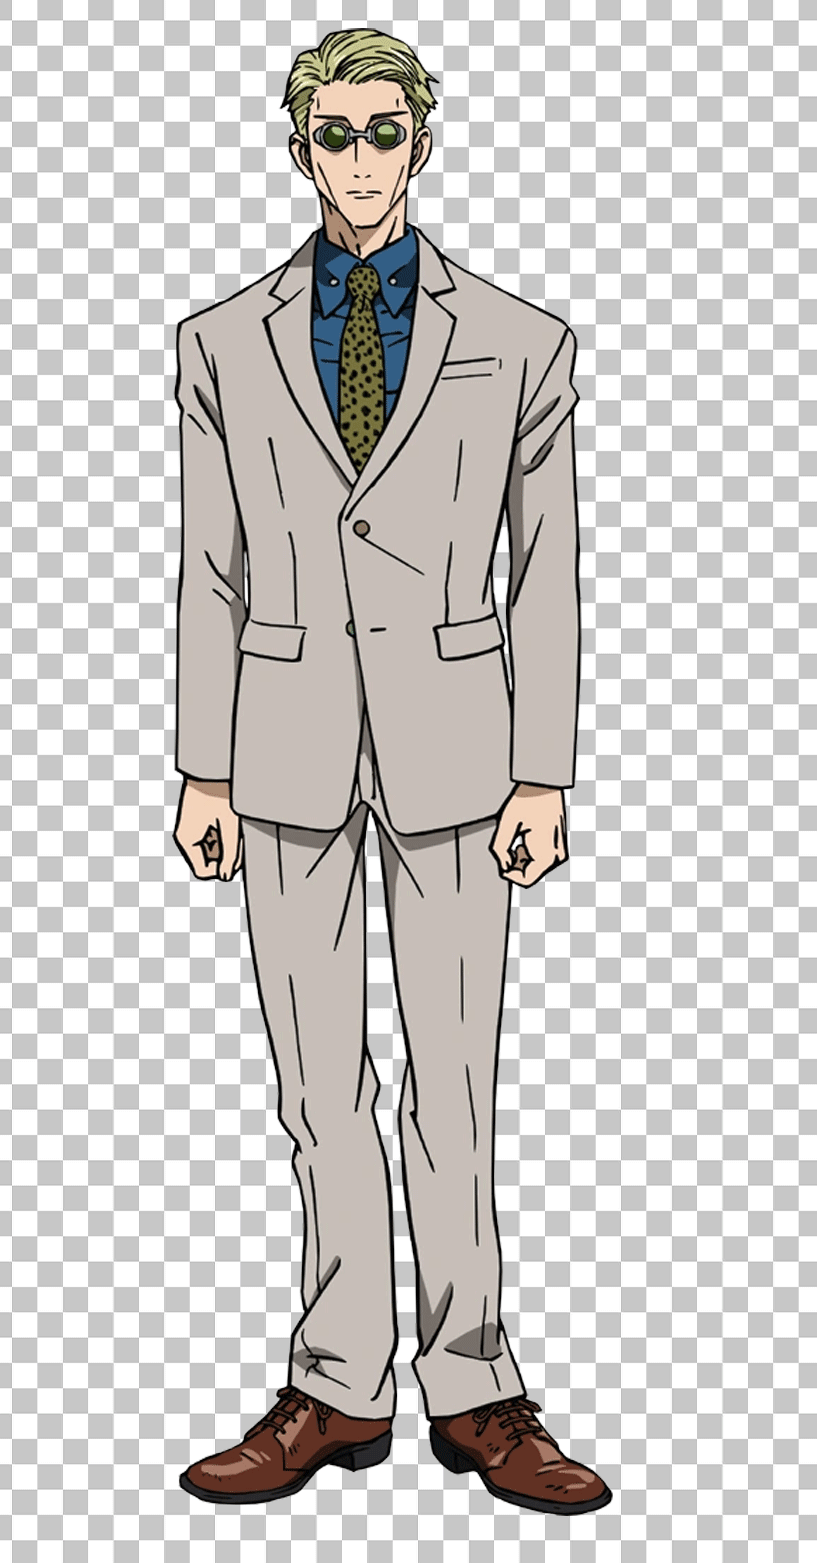 A PNG image of Kento Nanami in a suit and tie, standing confidently.